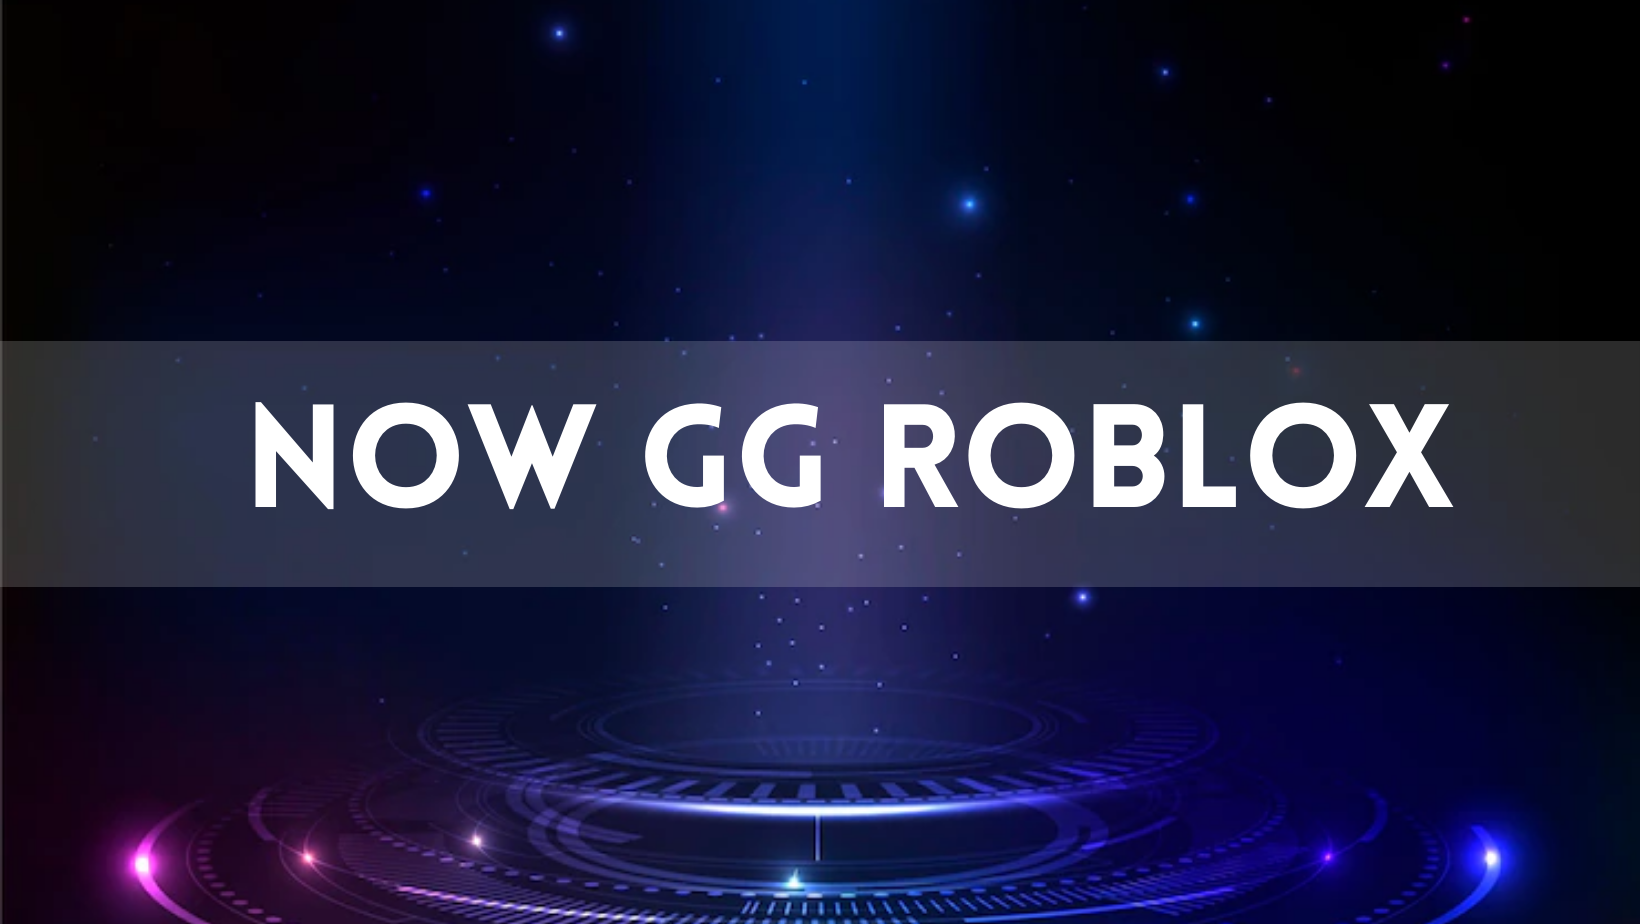 Roblox on now.gg.roblox: Play & Boost Your Gaming Skills